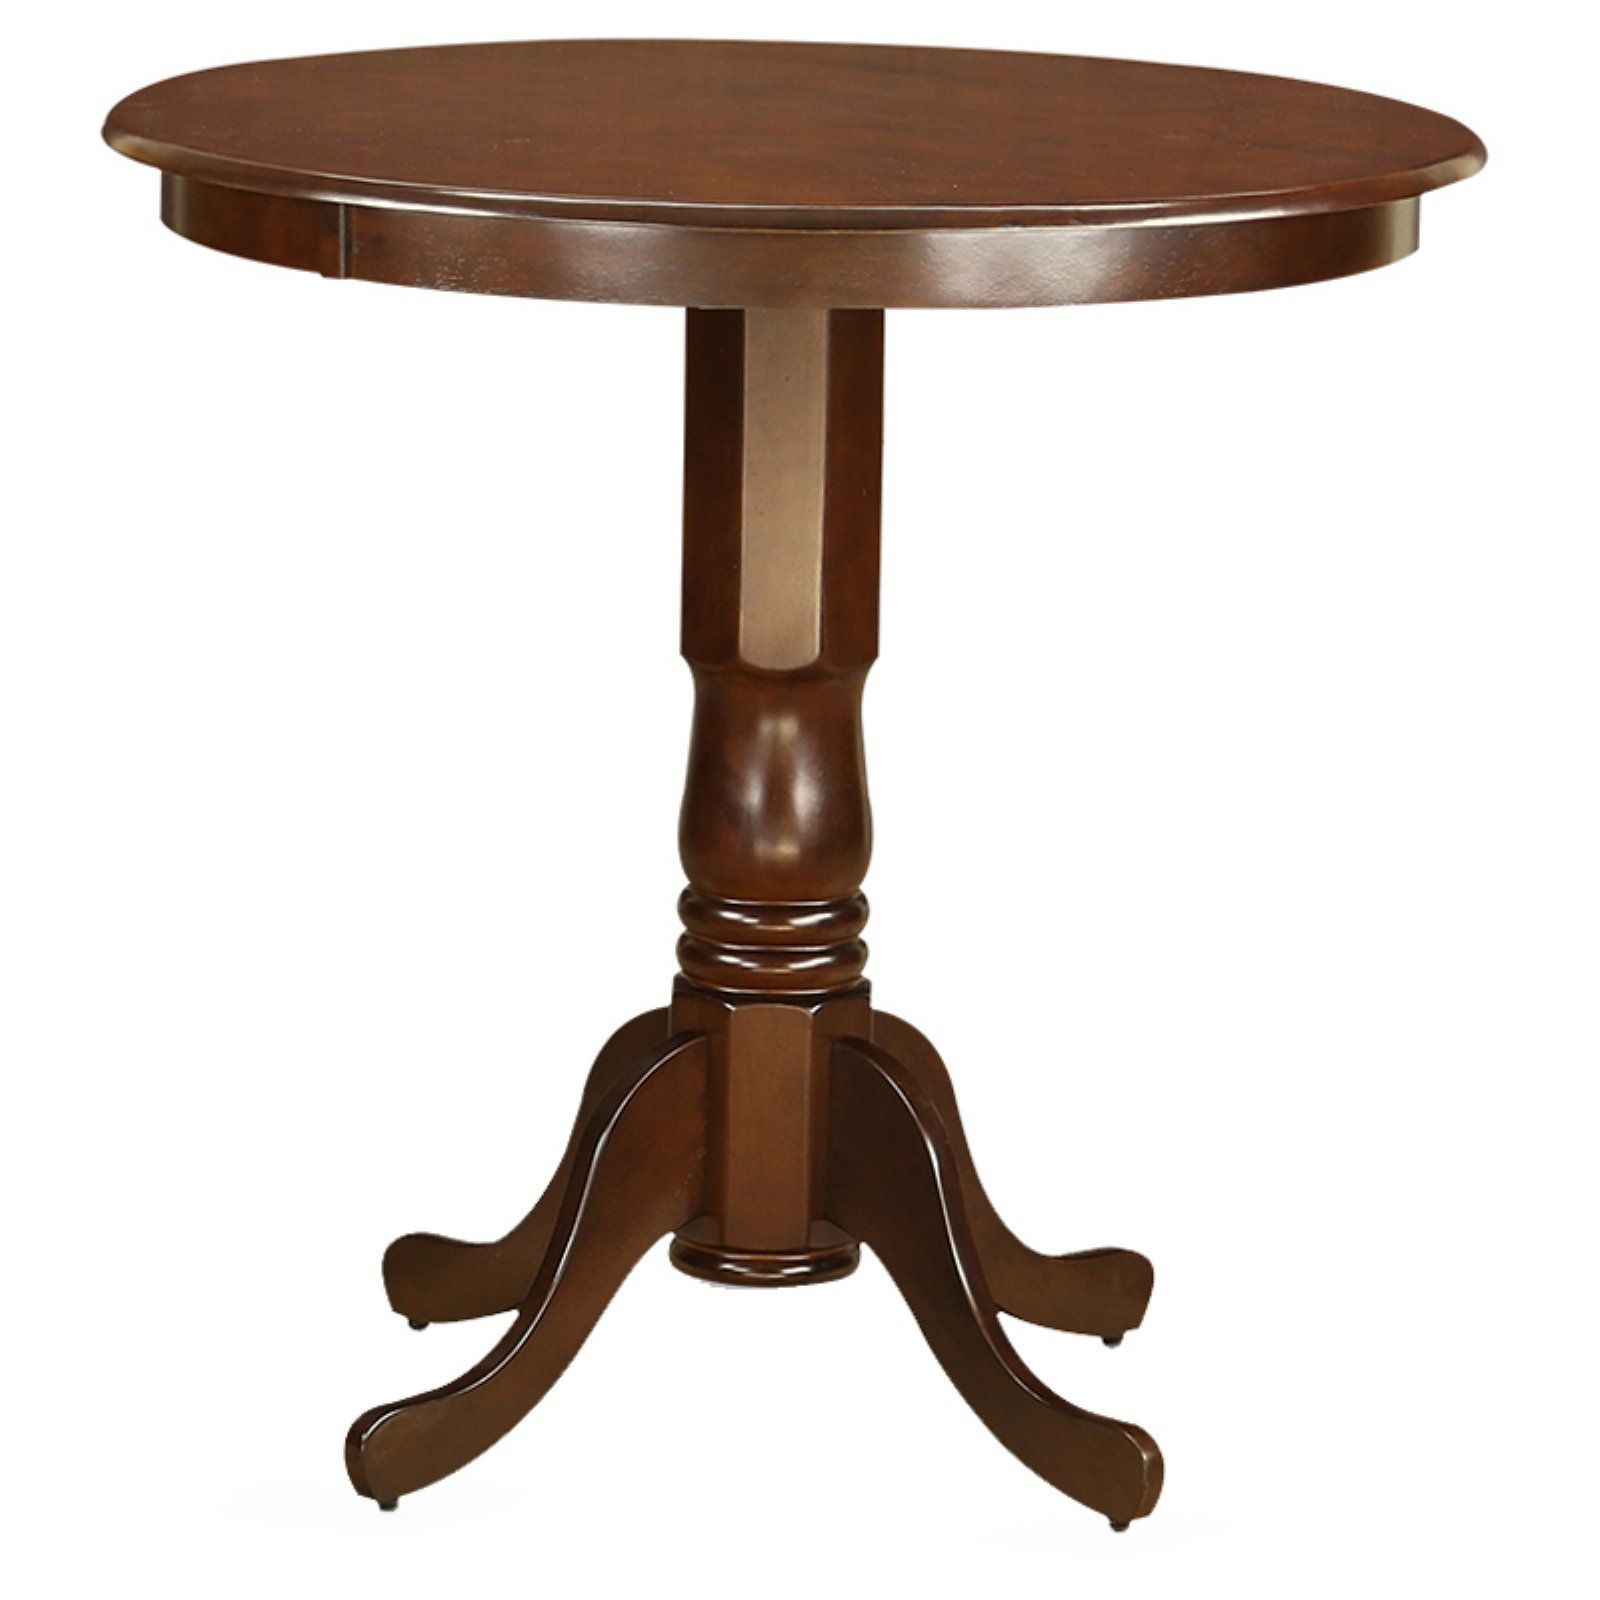 East West Furniture Jackson Pedestal 36 Inch Round Counter For Most Recent Liesel Bar Height Pedestal Dining Tables (View 11 of 15)